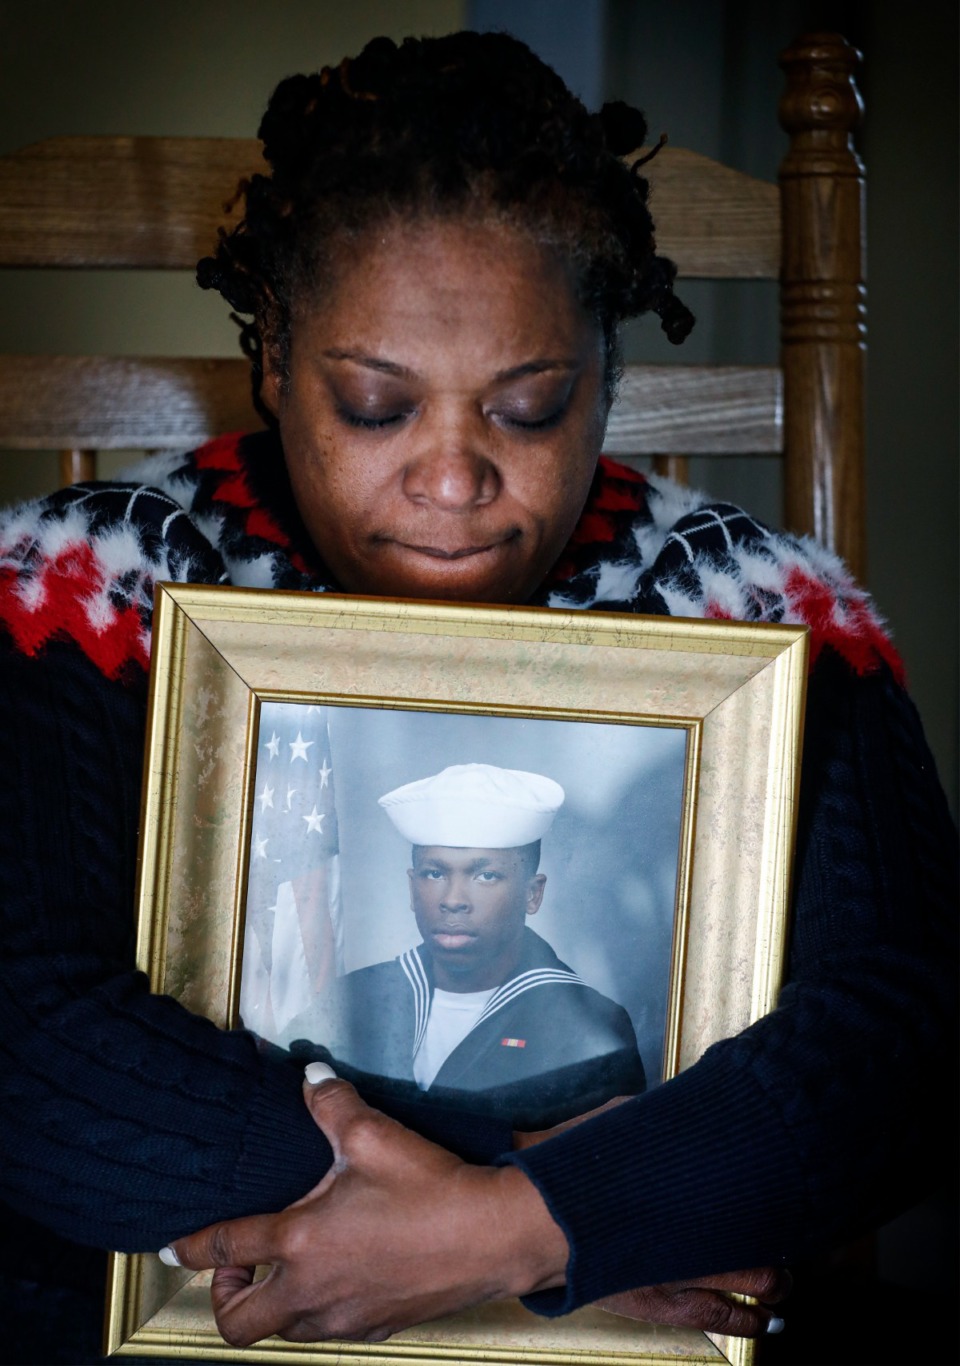 <strong>JoAnn Lewis hugs a portrait of her deceased son, Jerod Lewis, on Friday, Dec. 17, in her home. &ldquo;We need to change these gun laws,&rdquo; Lewis said.</strong>&nbsp;(Mark Weber/Daily Memphian)